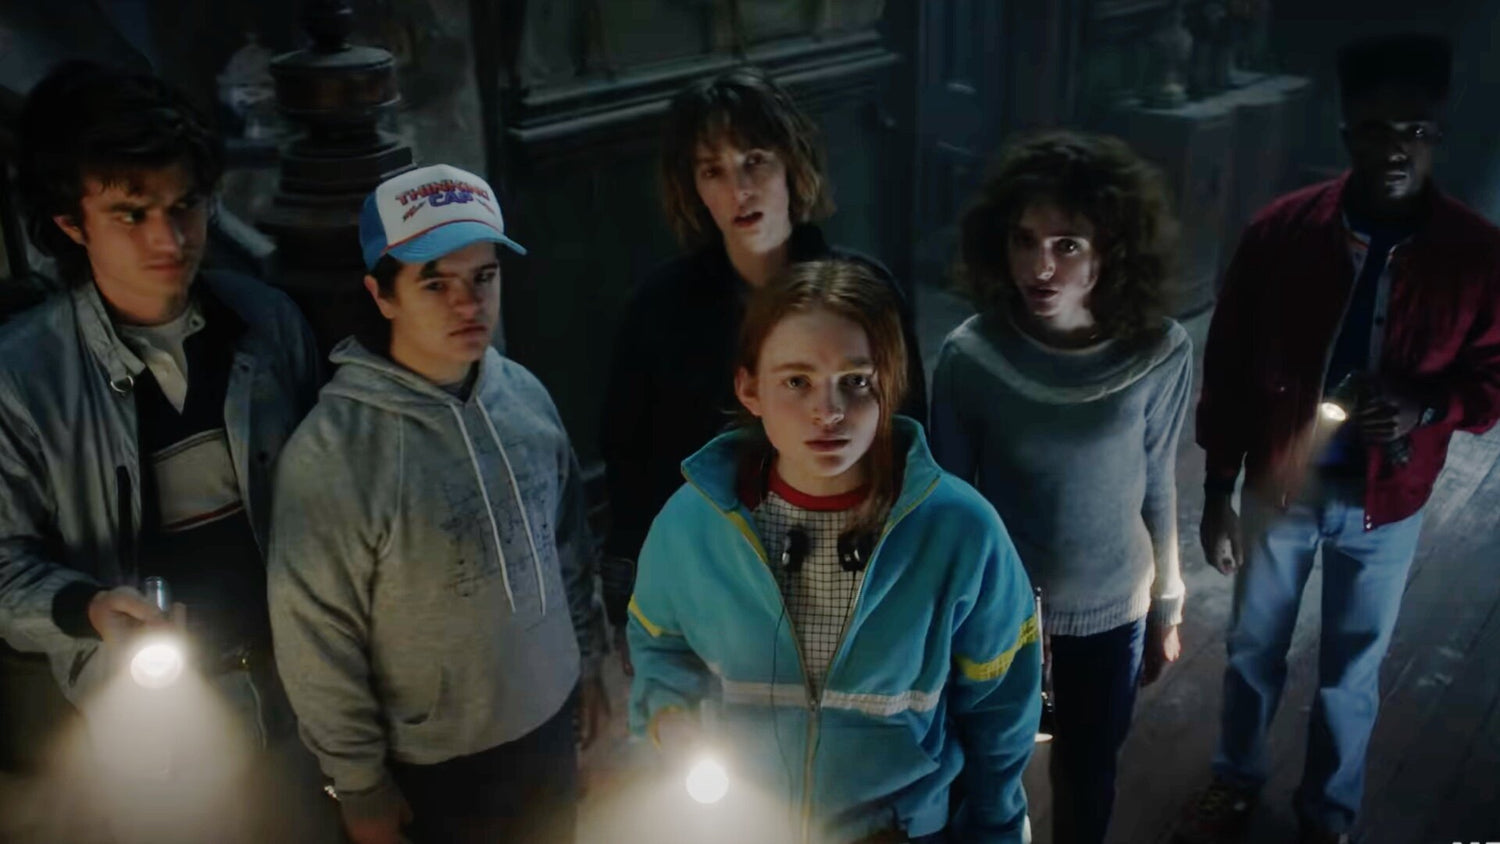 Stranger Things' Season 4 to Premiere in 2022 - New Teaser and New Footage